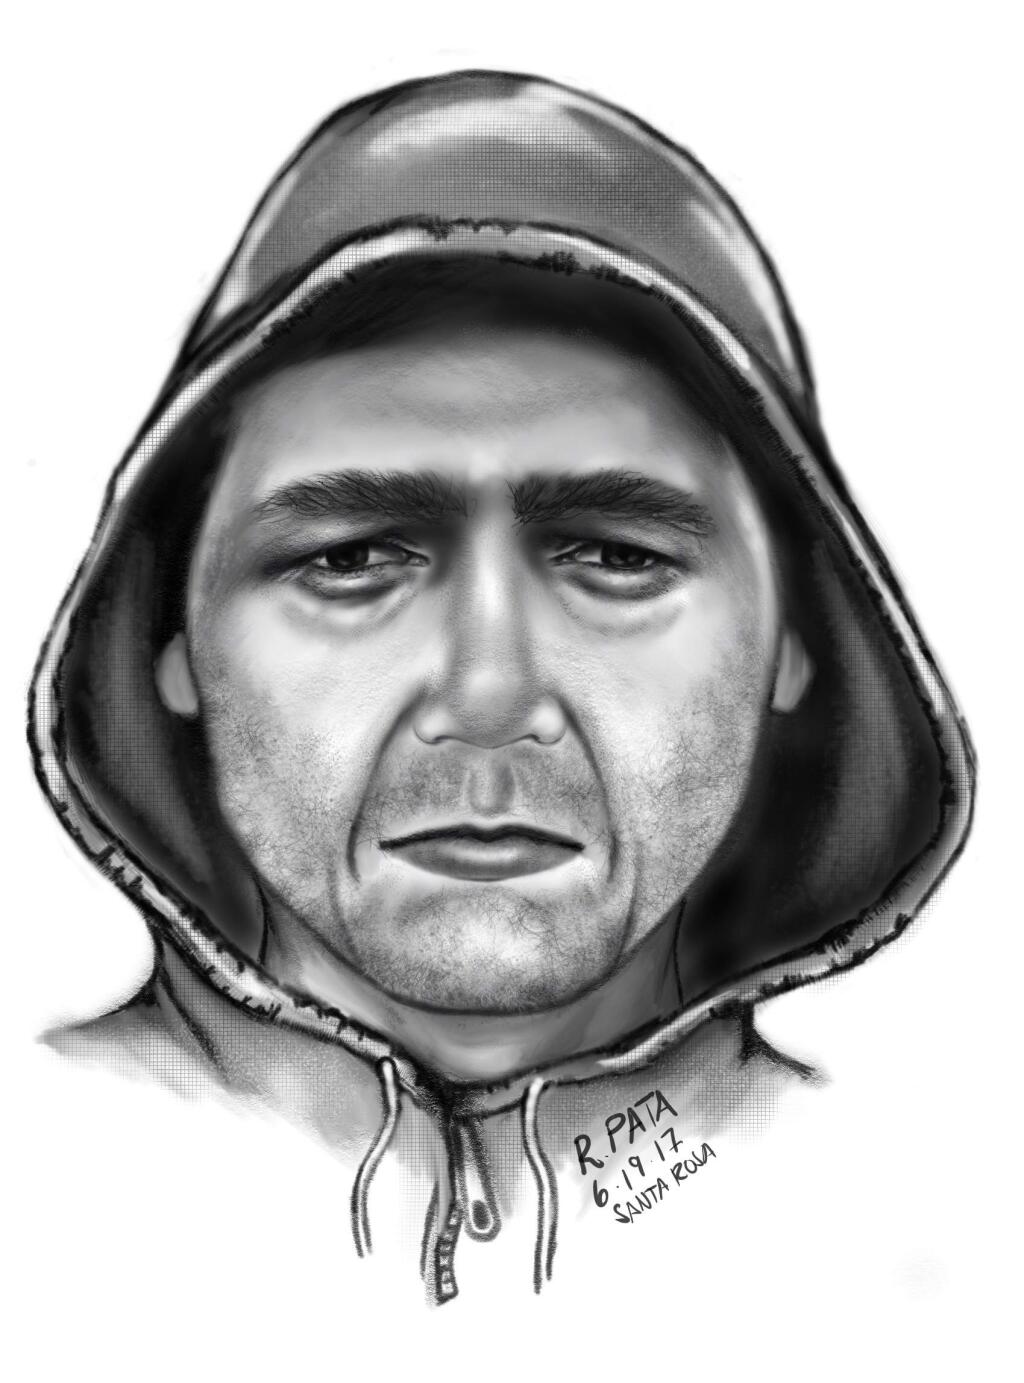 Police sketch of a man suspected of groping a woman during a June 9 attempted robbery near downtown Santa Rosa. (Photo courtesy of the Santa Rosa Police Department)